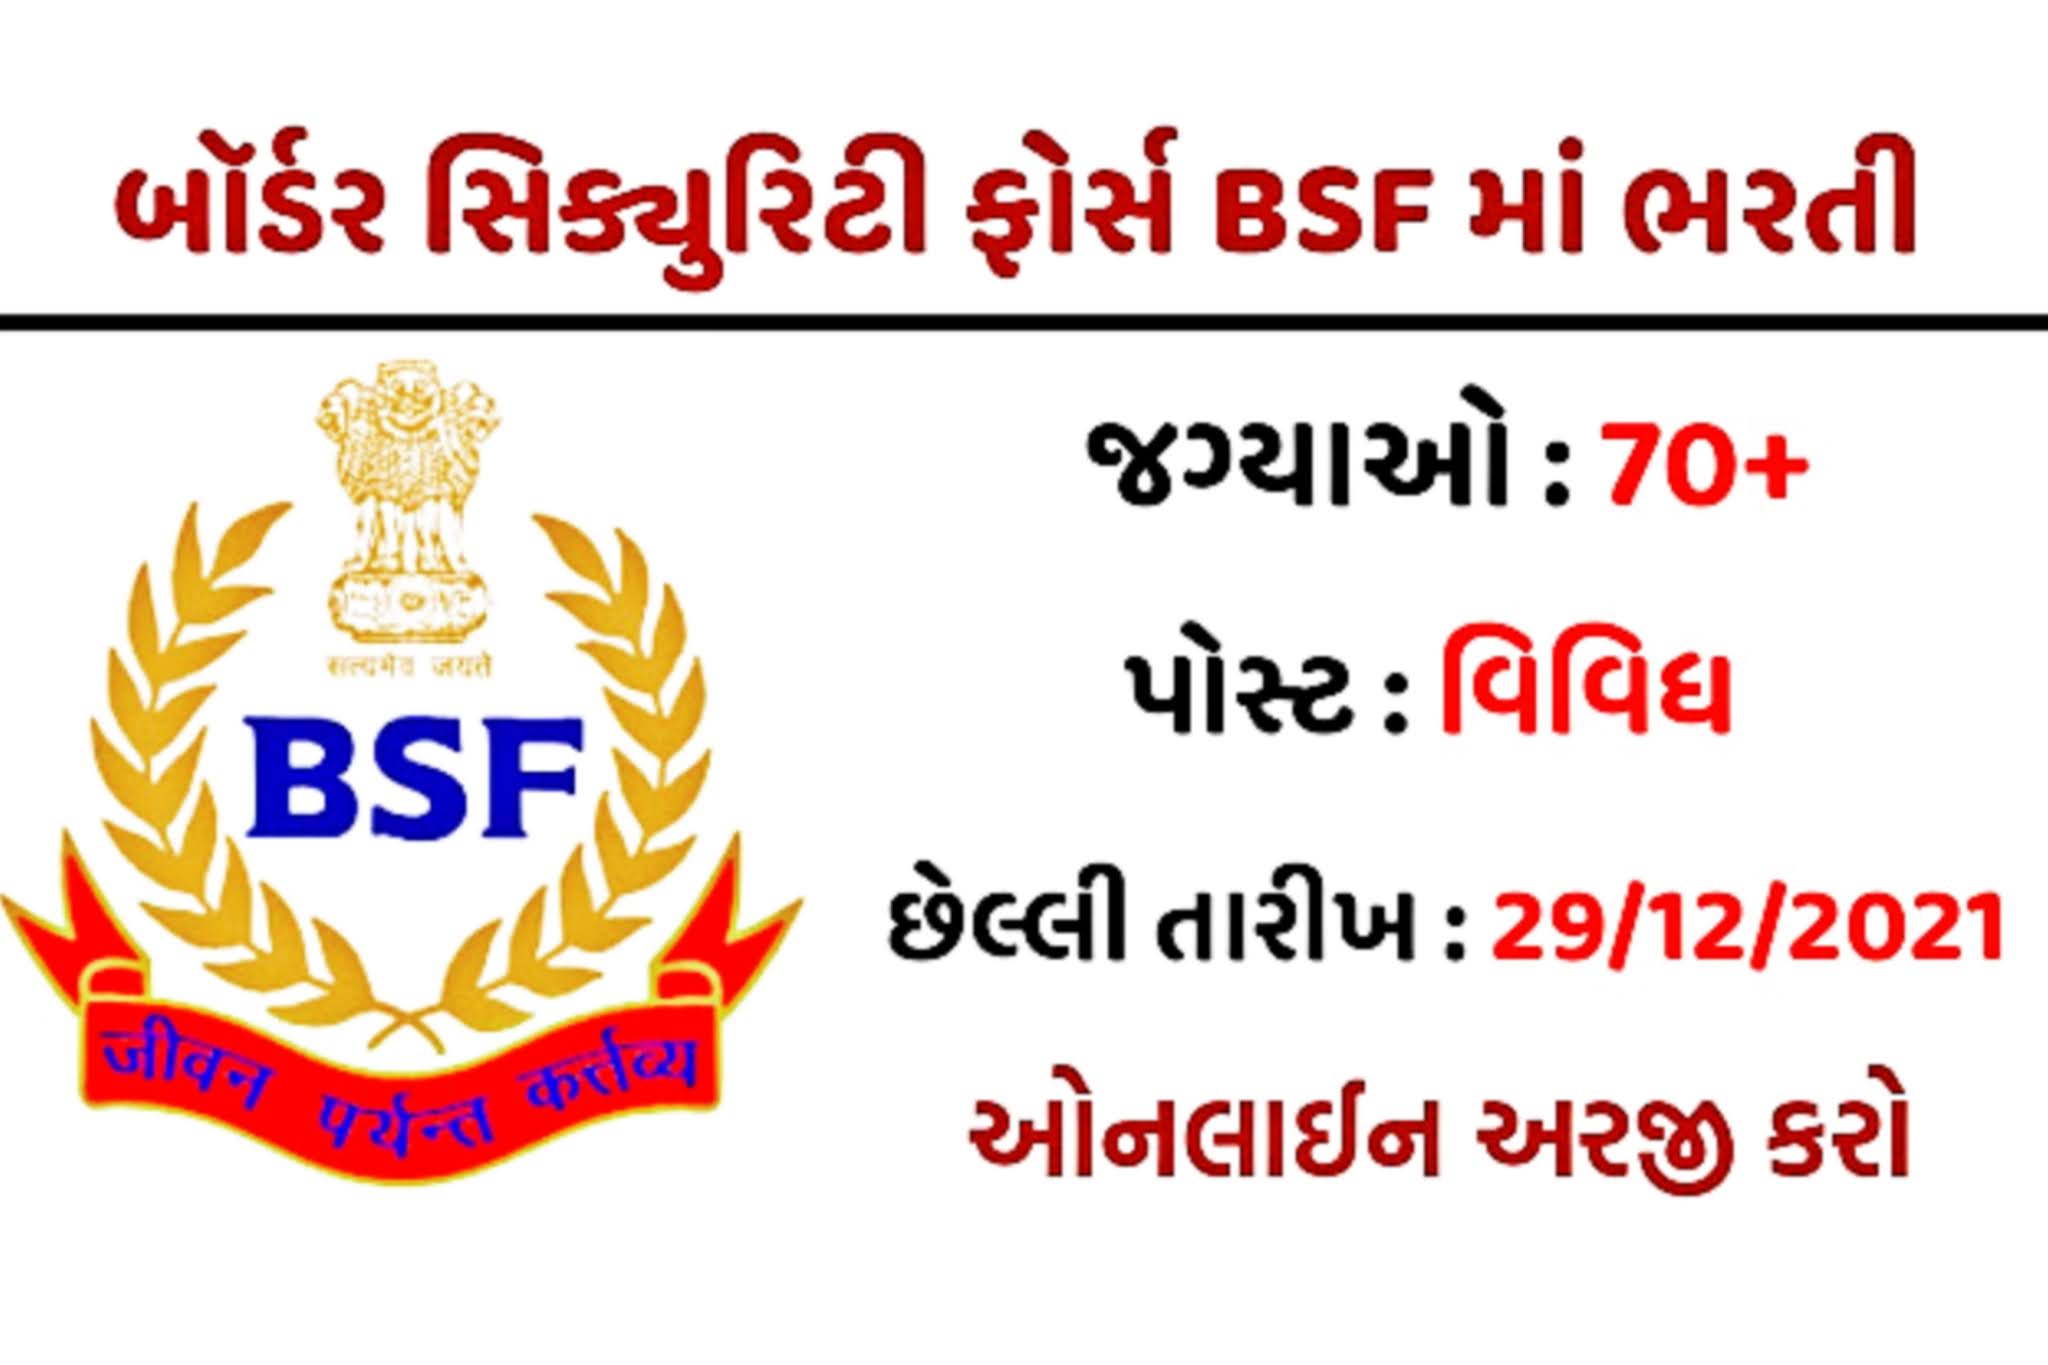 BSF Recruitment 2021 PDF BSF Recruitment 2021 for female BSF Recruitment 2021 qualification BSF Recruitment 2021 age limit BSF Result BSF online apply BSF Recruitment 2021 West Bengal BSF salary